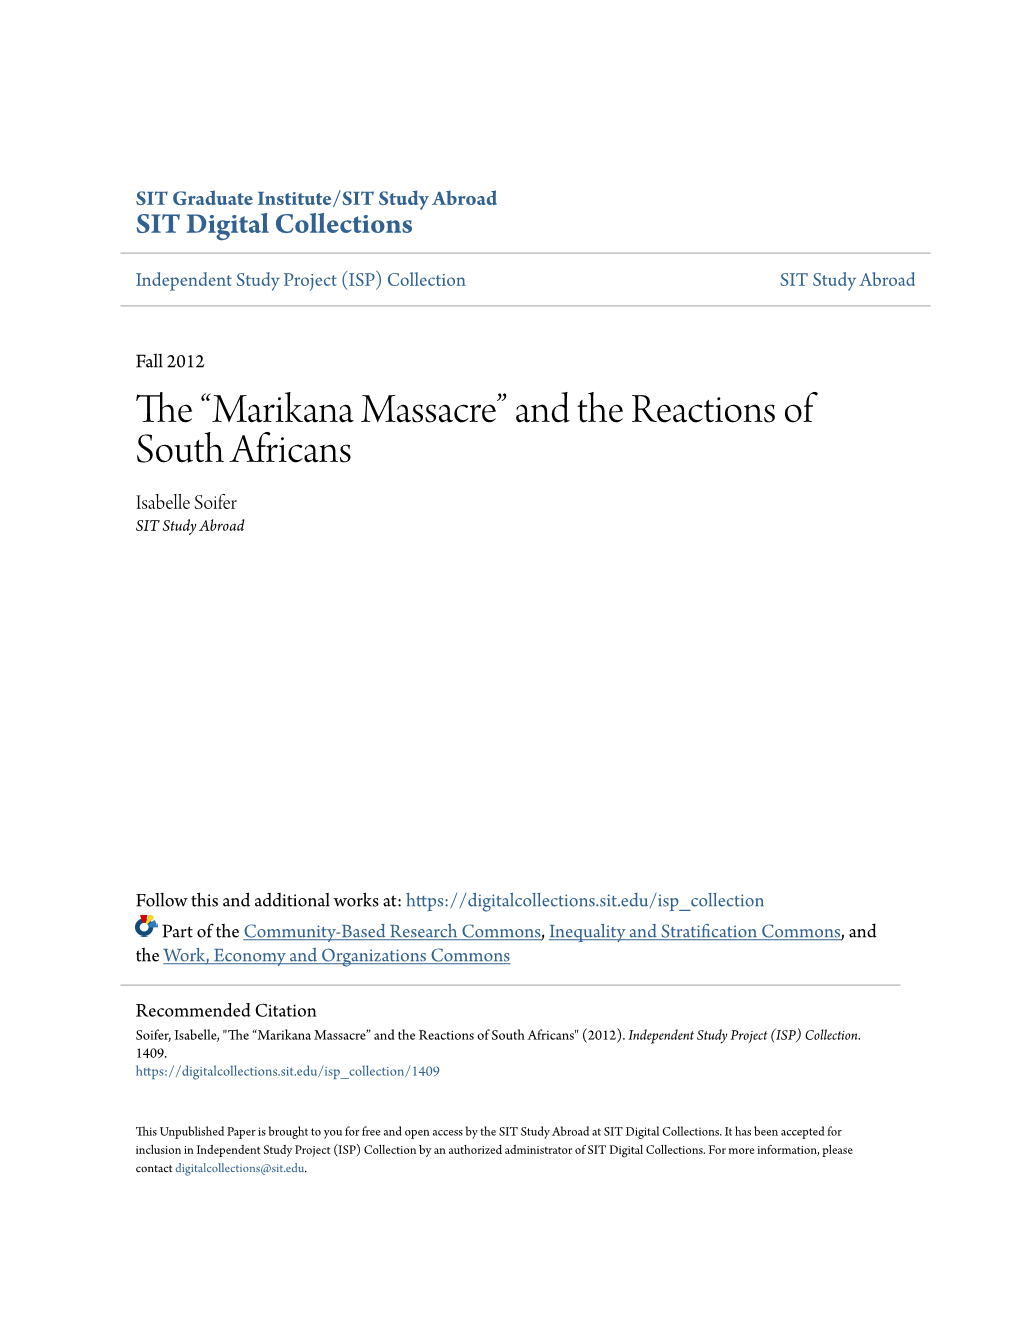 Marikana Massacre” and the Reactions of South Africans Isabelle Soifer SIT Study Abroad